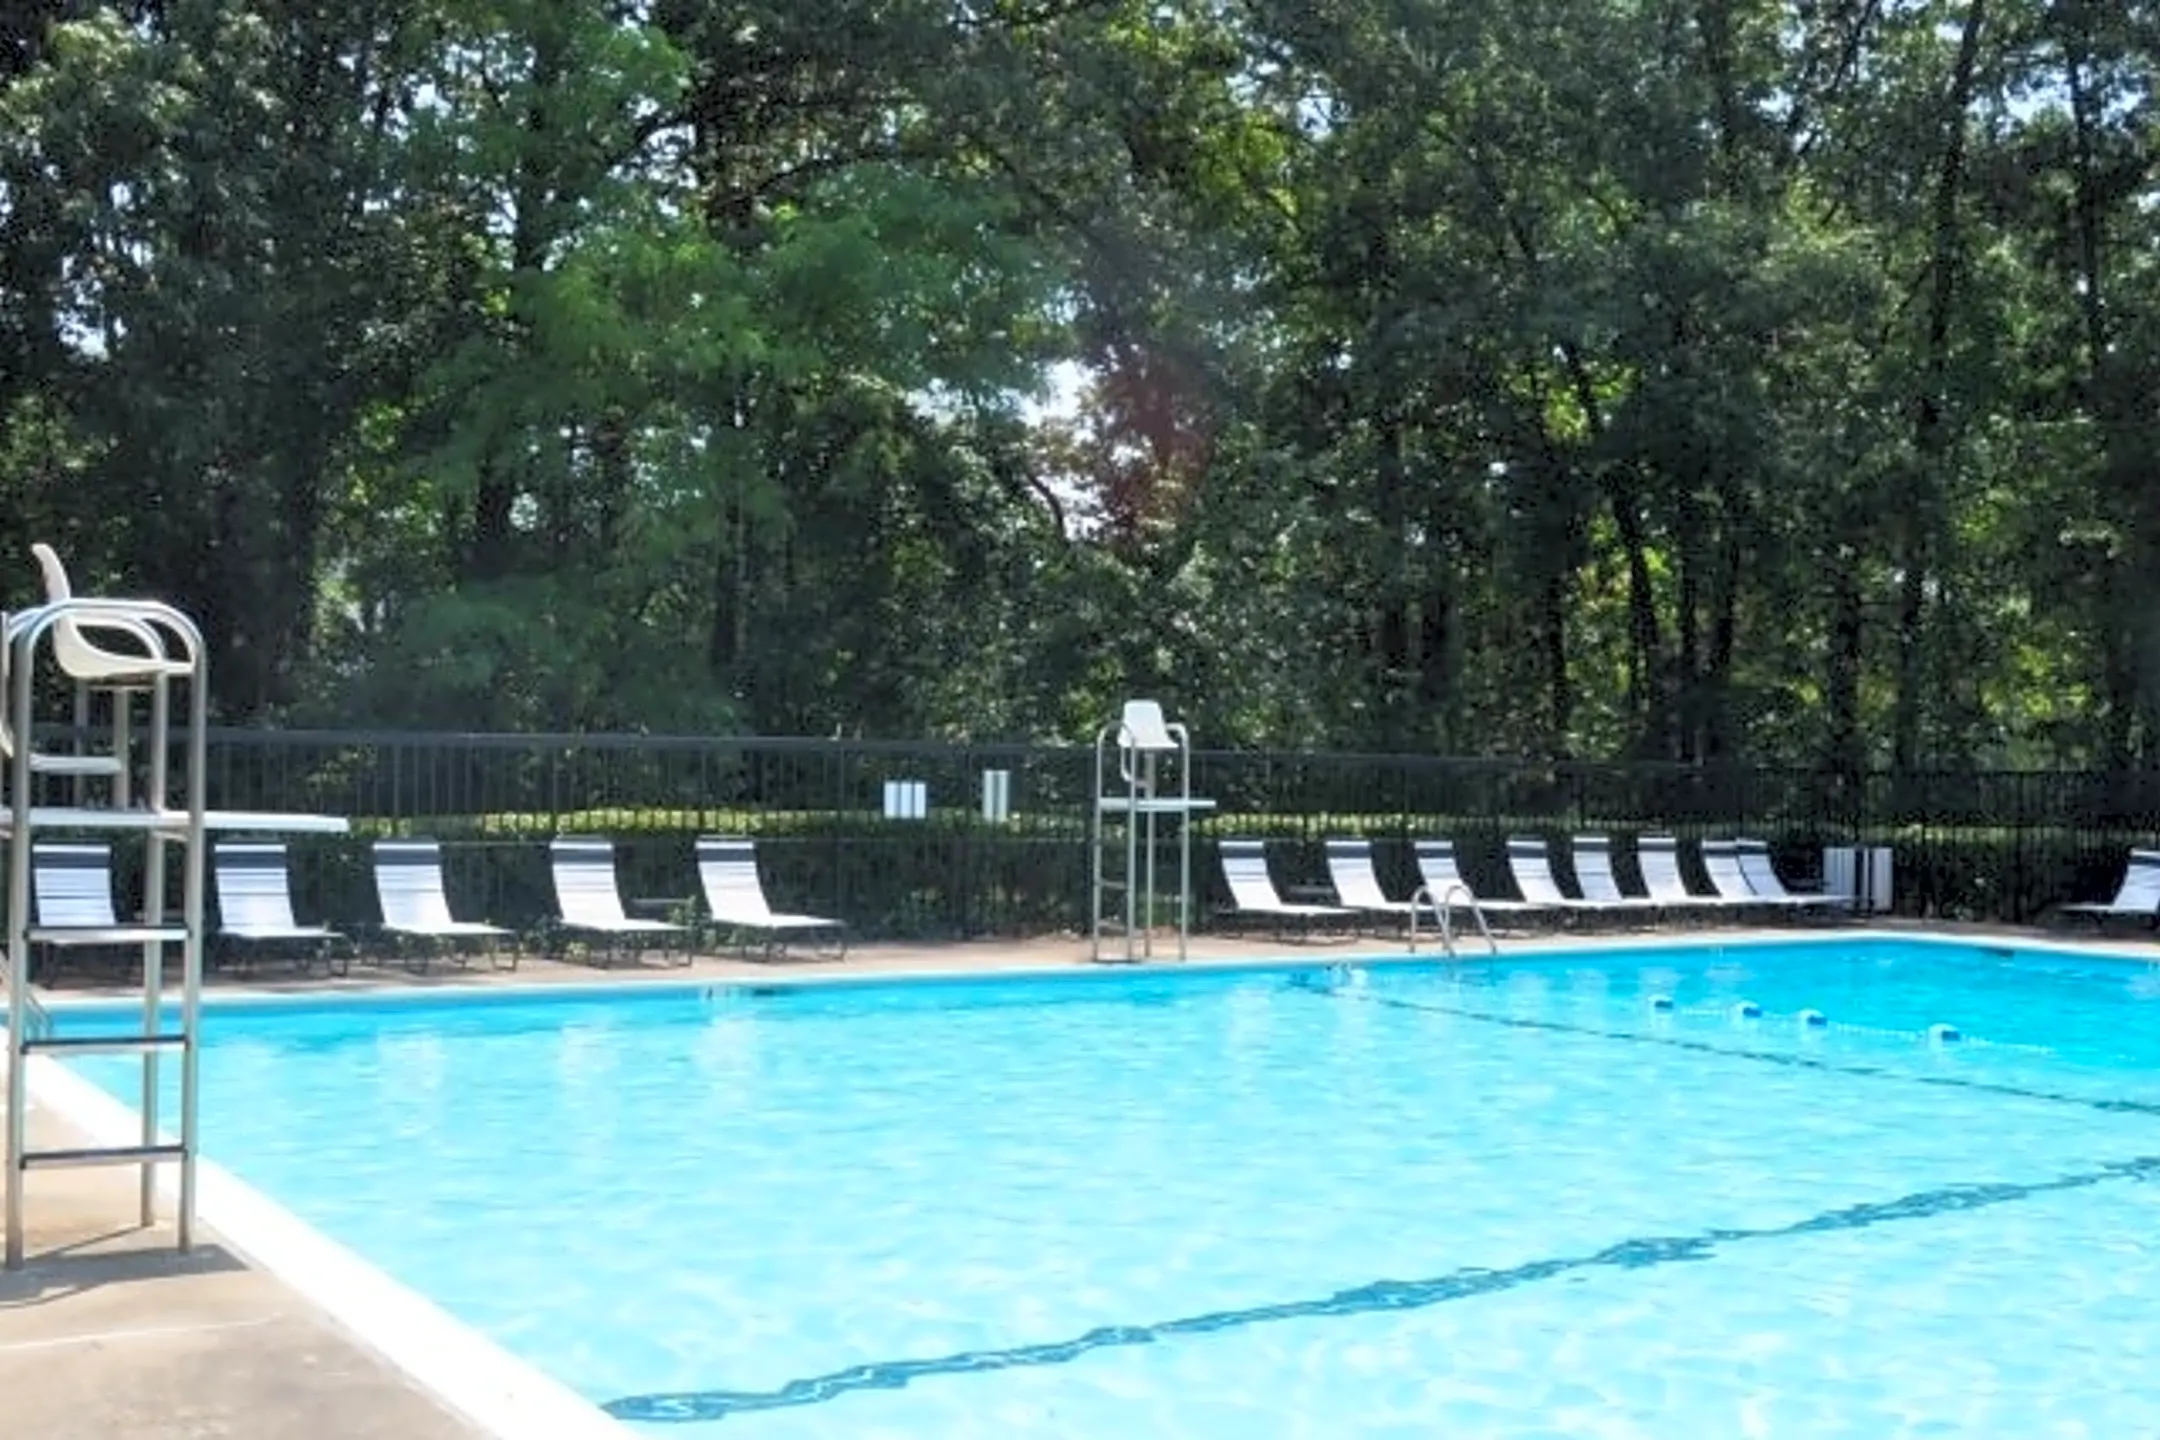 Pool - The Elms at Old Mill - Millersville, MD